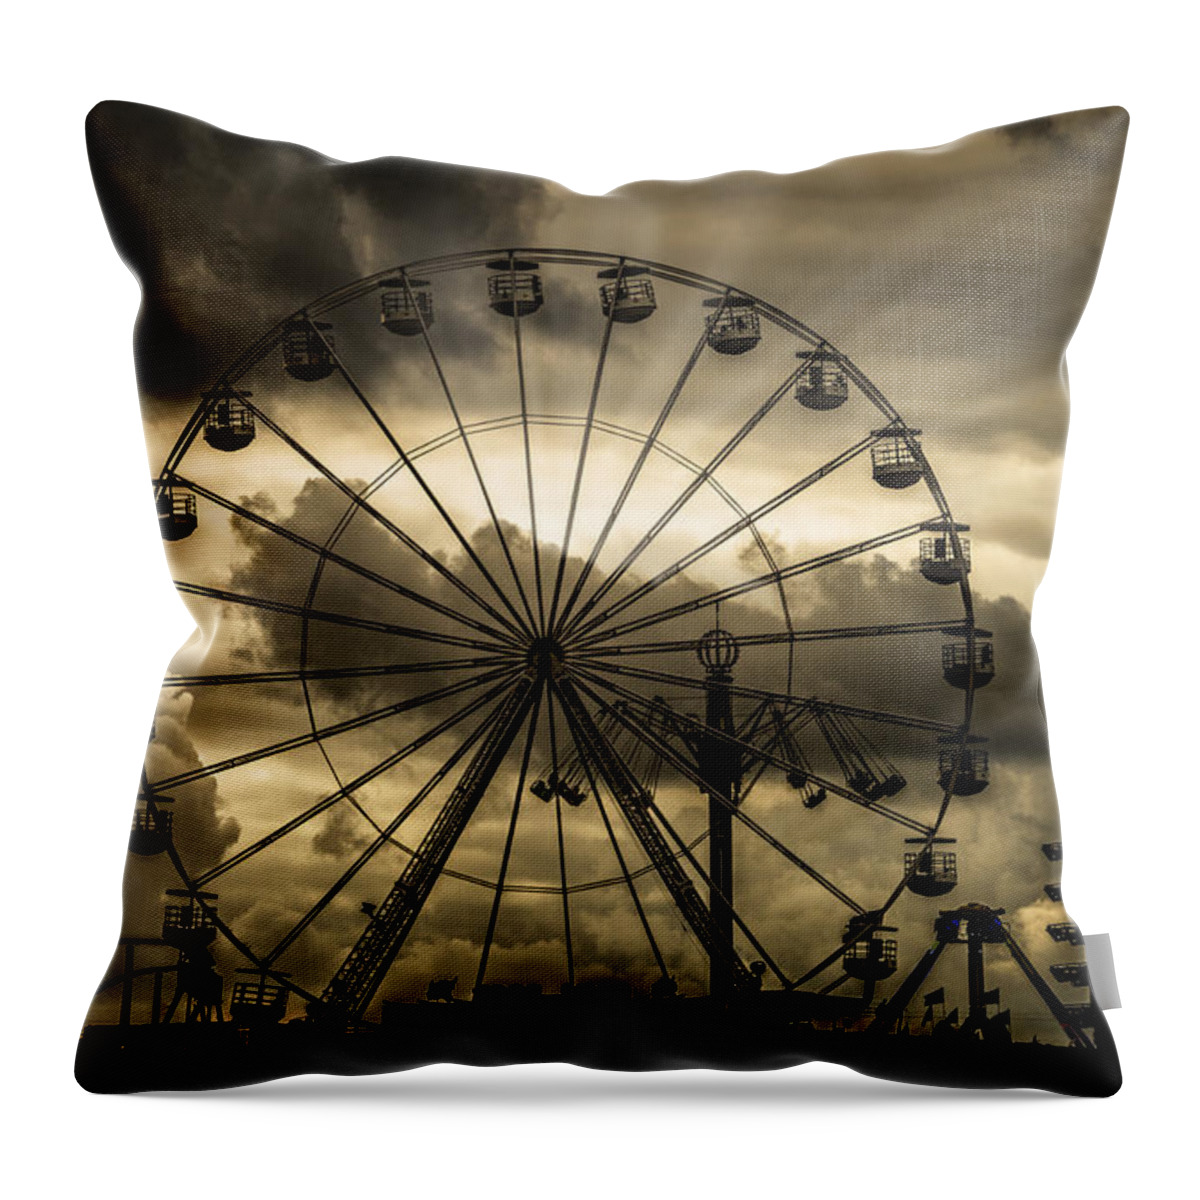 Ferris Wheel Throw Pillow featuring the photograph A Day At The Fair by Chris Lord